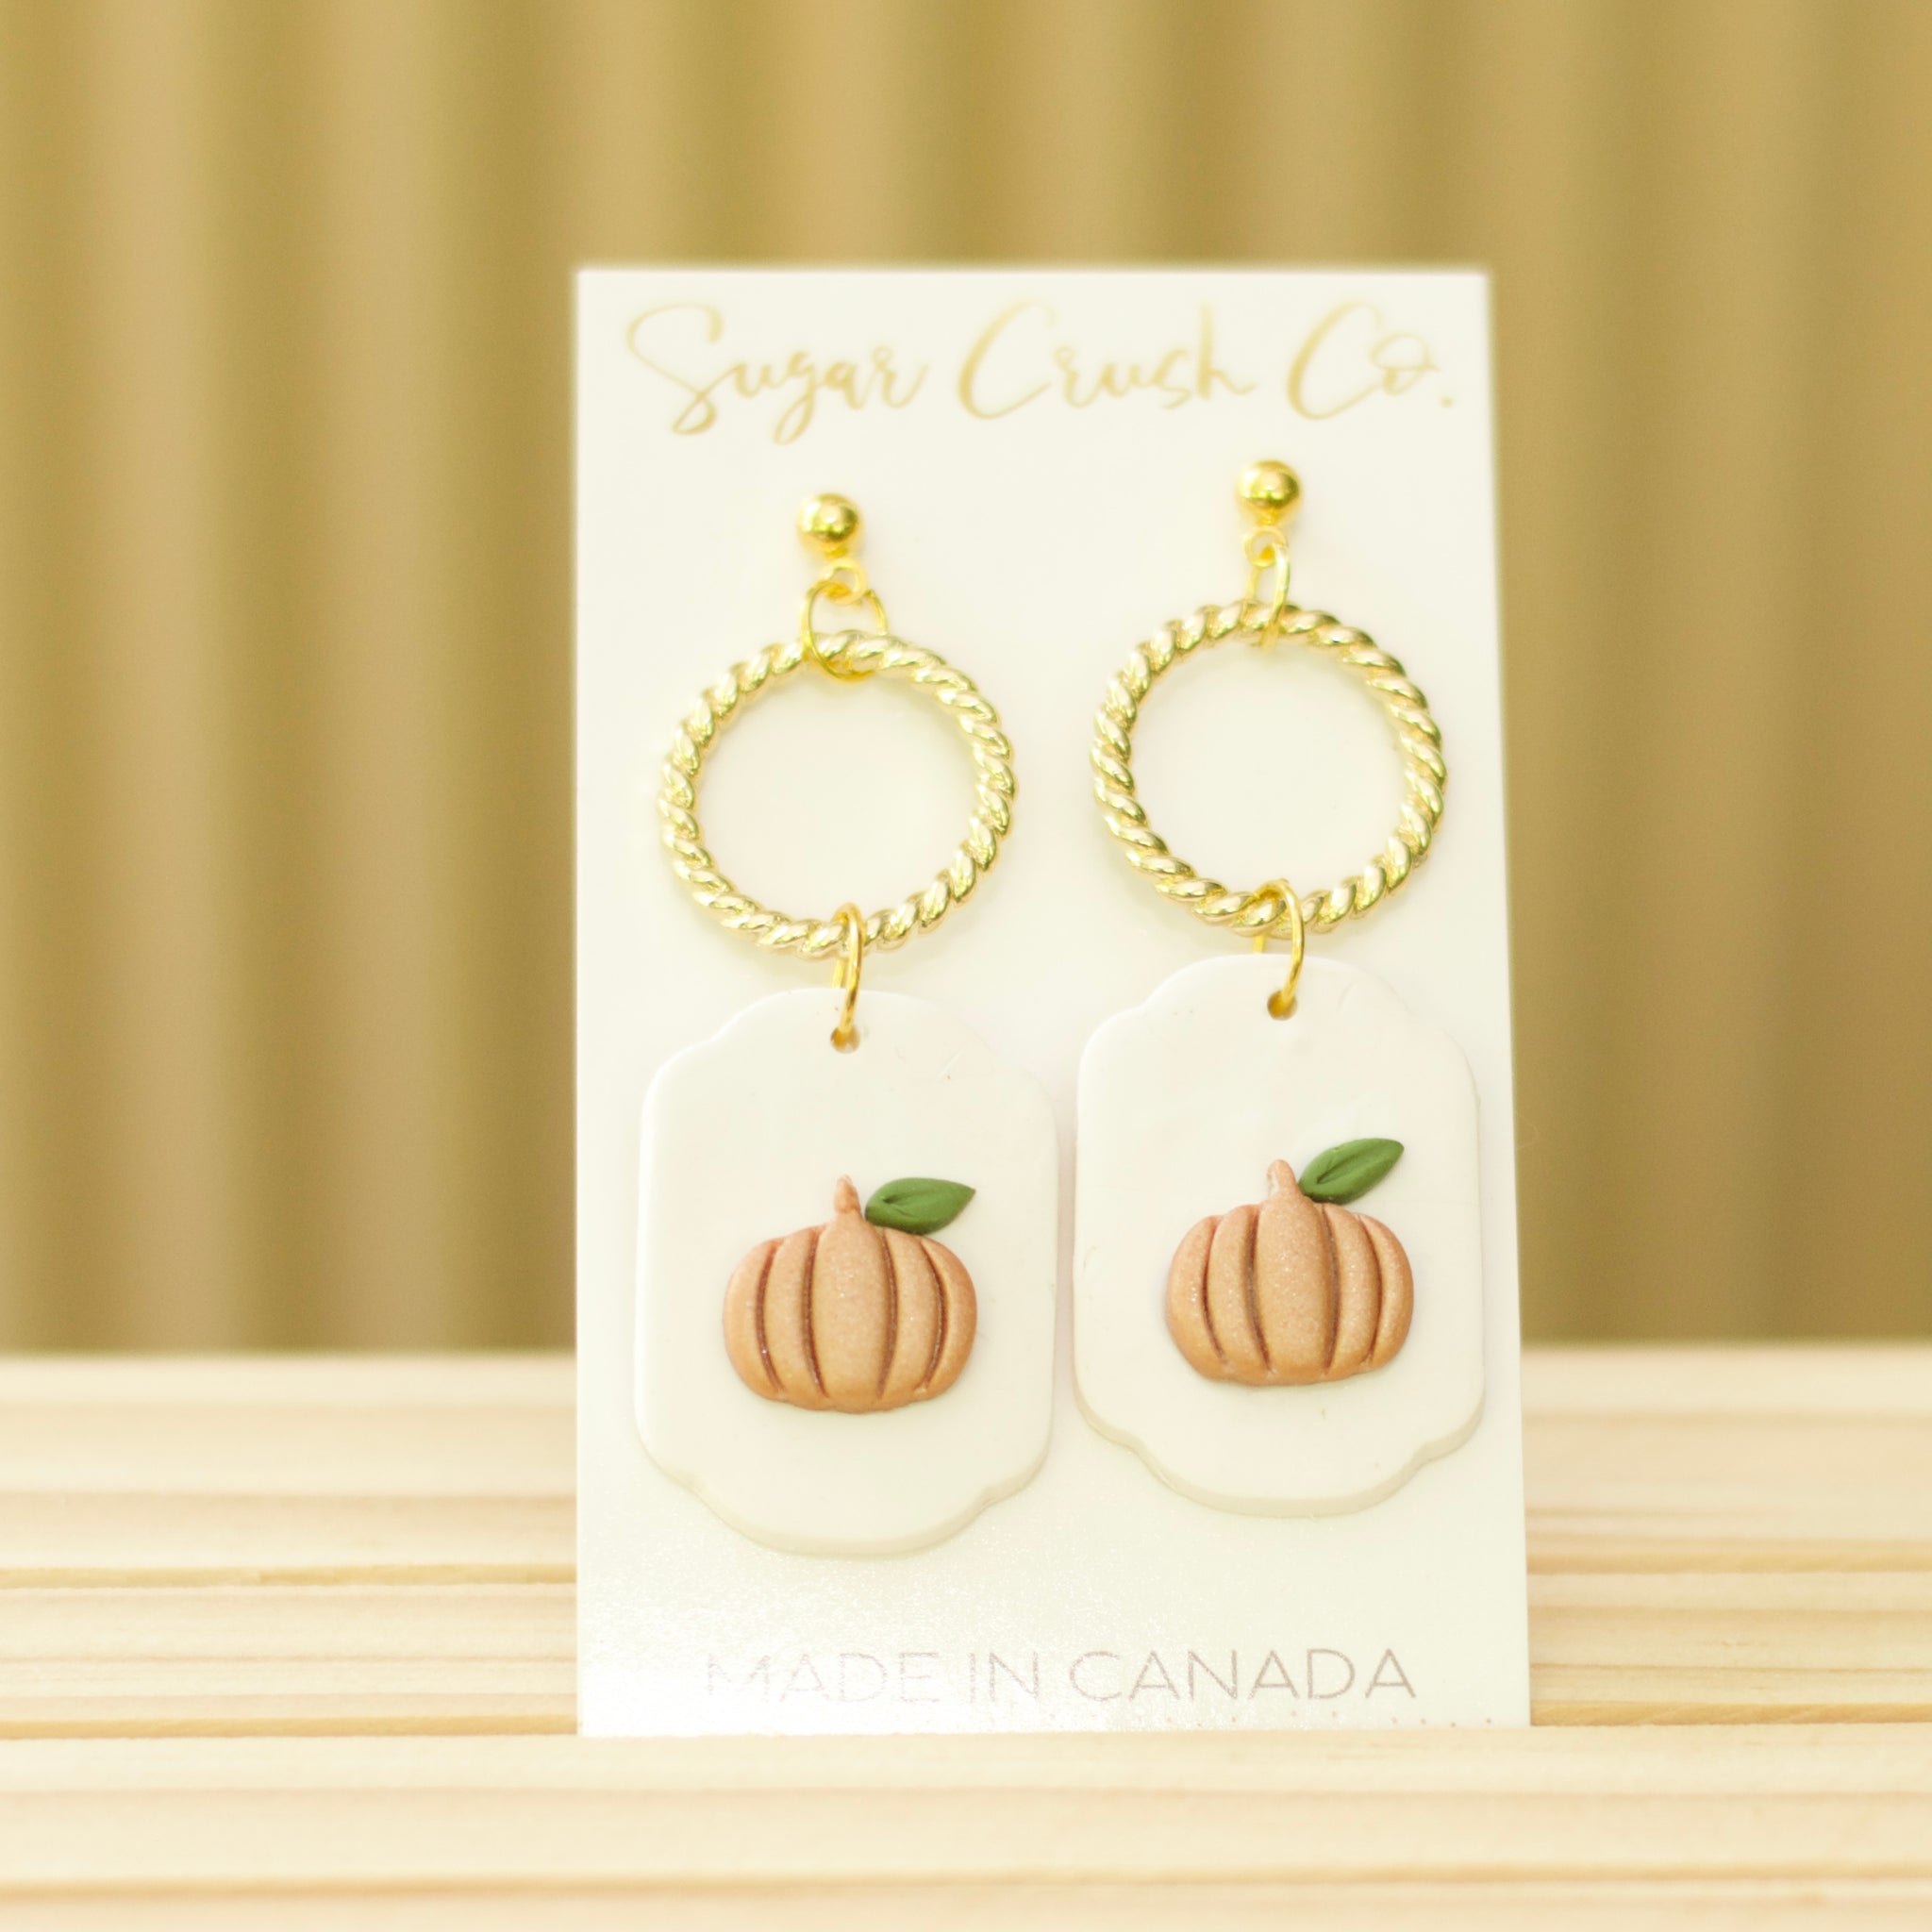 What are Polymer Clay Earrings?